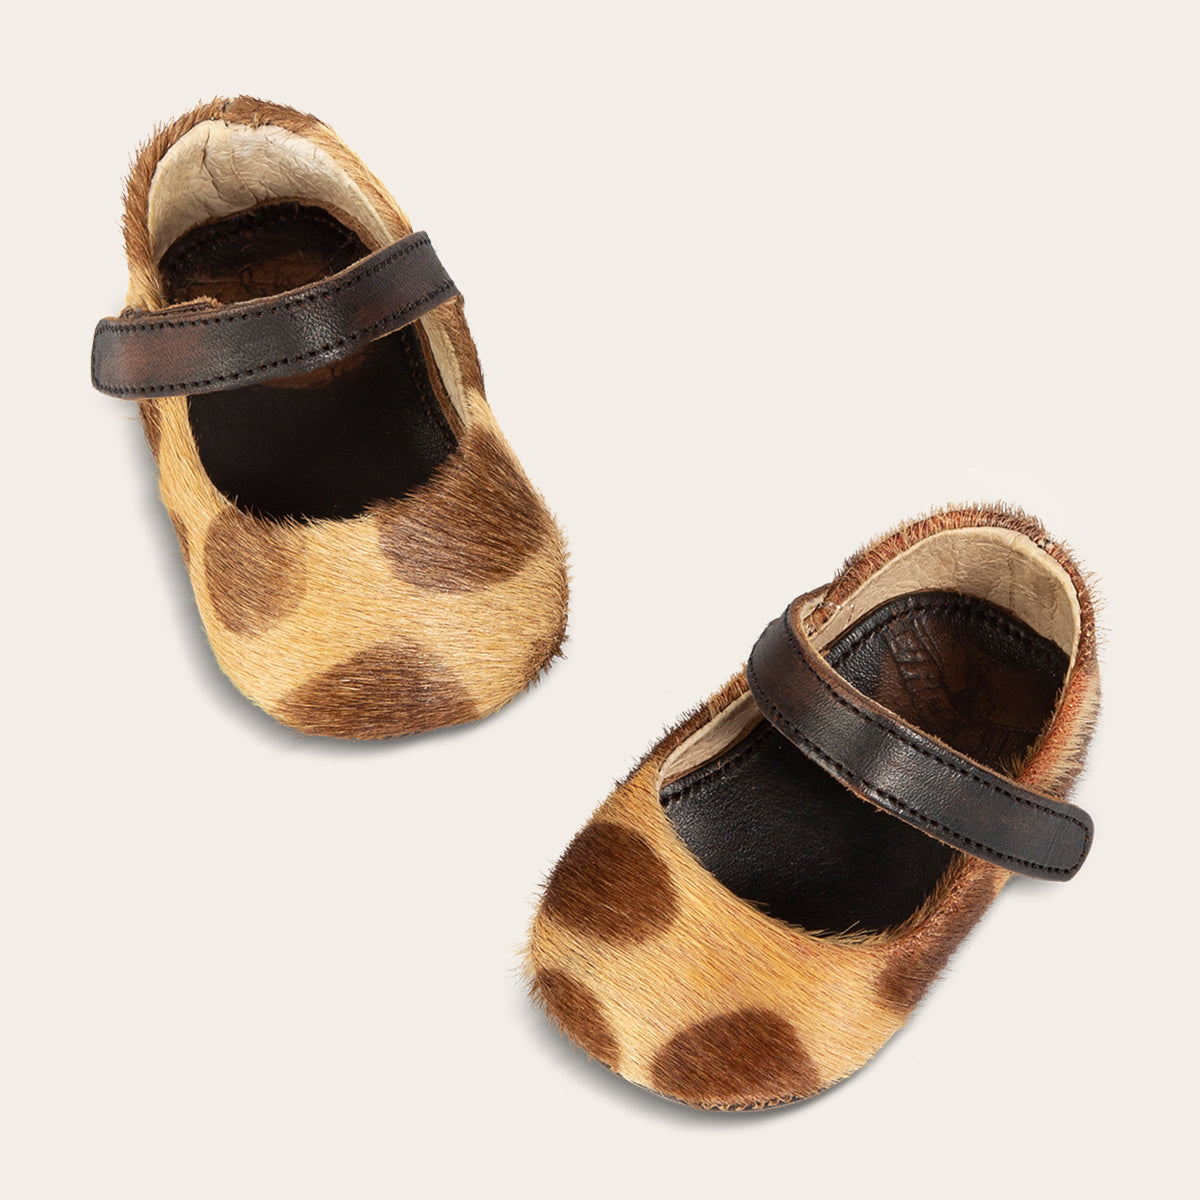 top view showing top leather strap on FREEBIRD infant baby Jane leopard leather shoe